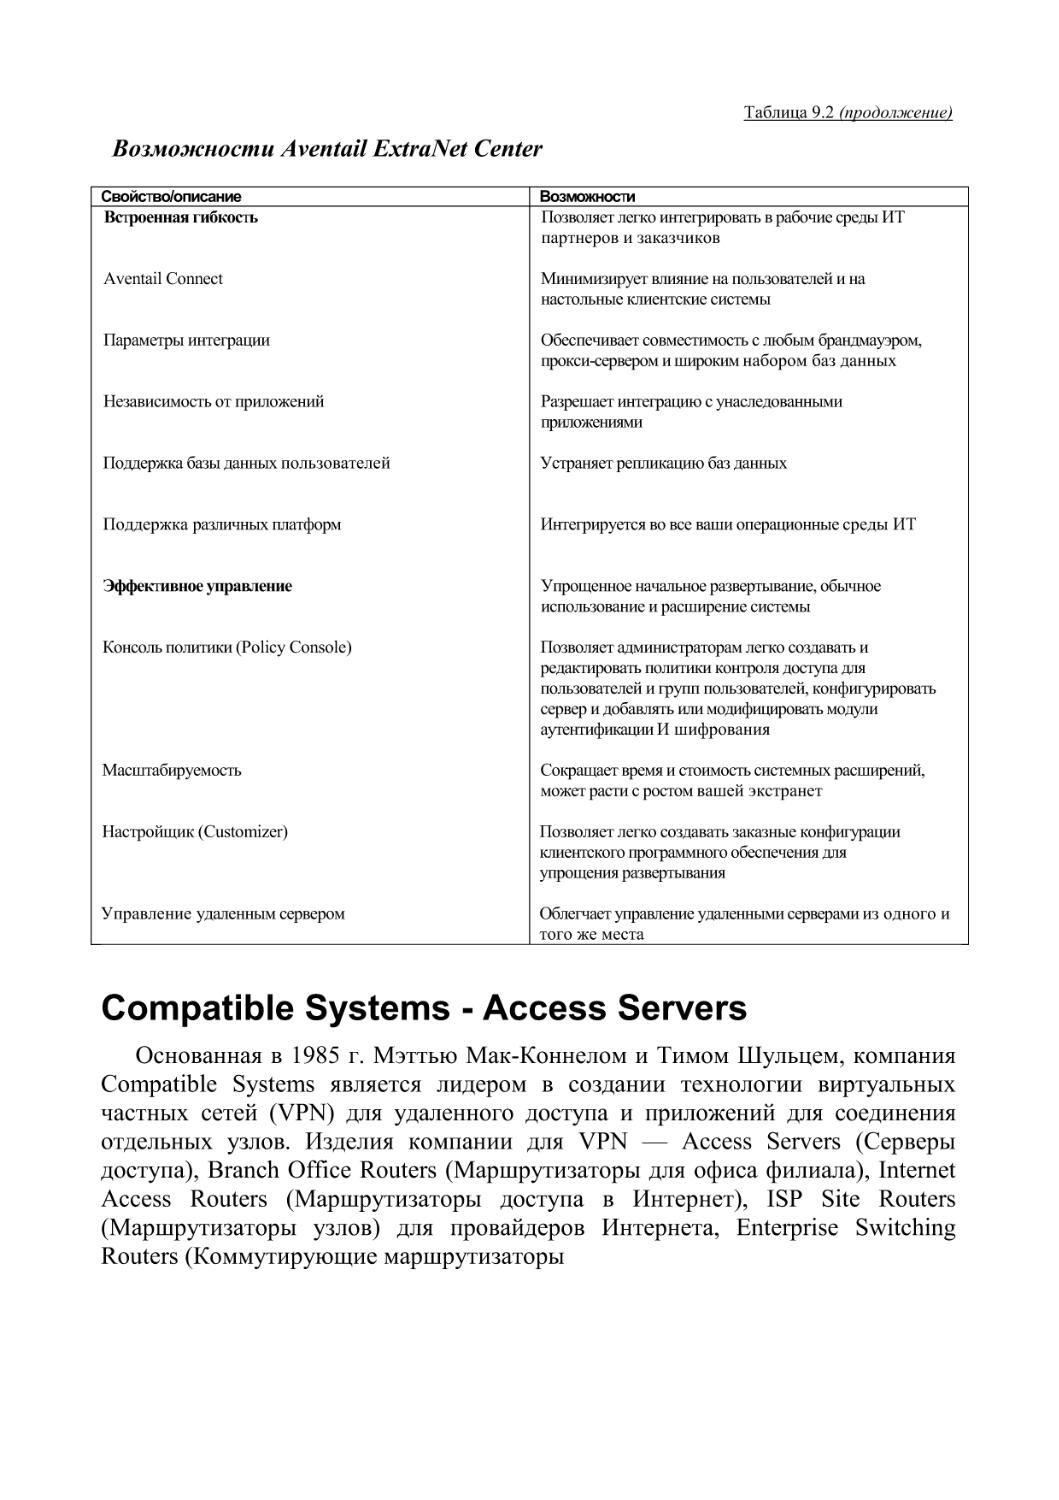 Compatible Systems - Access Servers